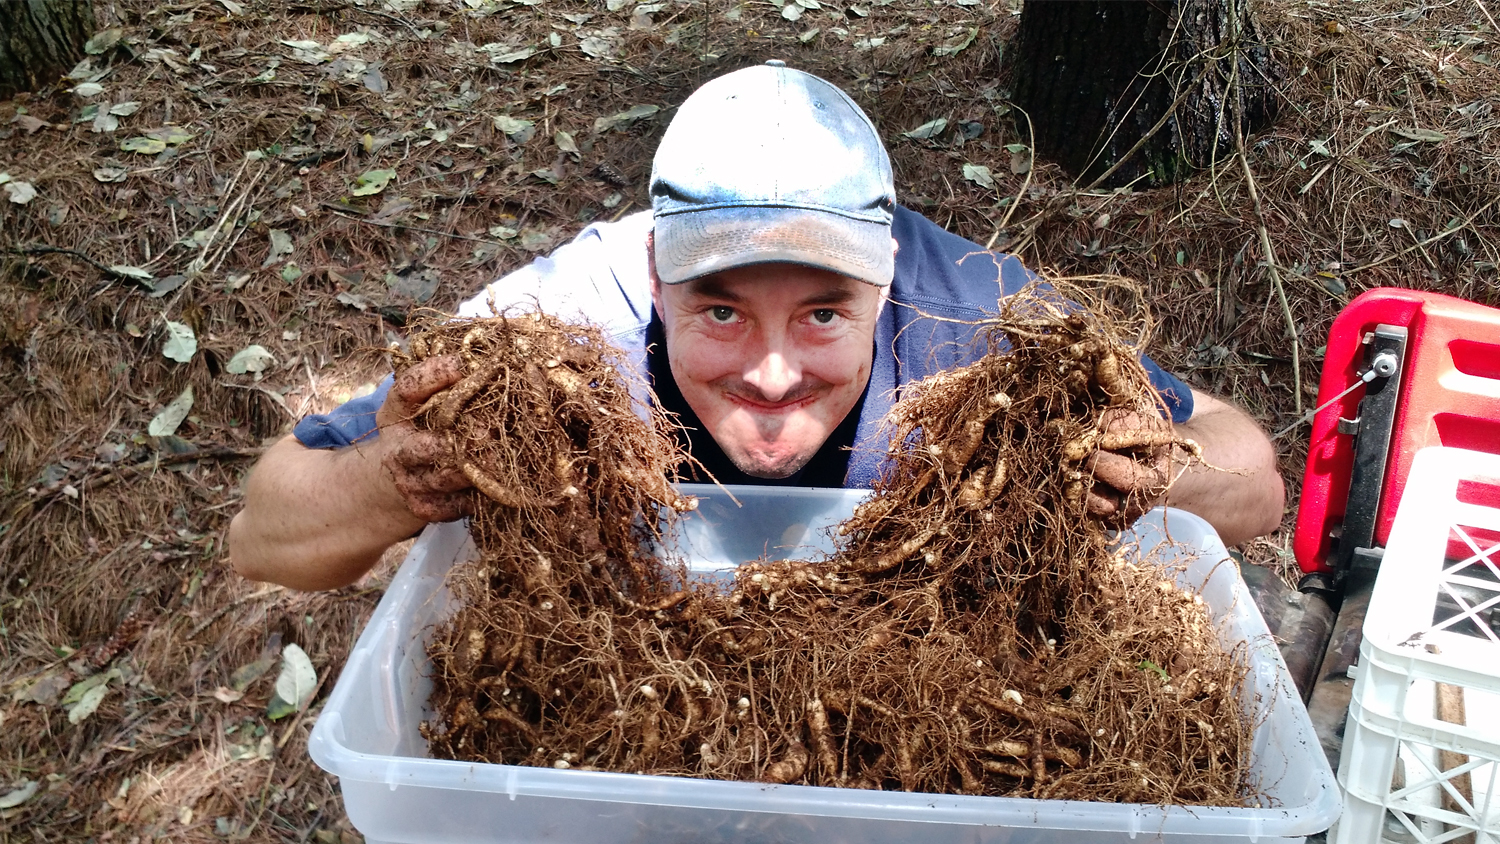 Watauga County NC Cooperative Extension Director Dr. Jim Hamilton poses with both hands full of harvested ginseng roots.